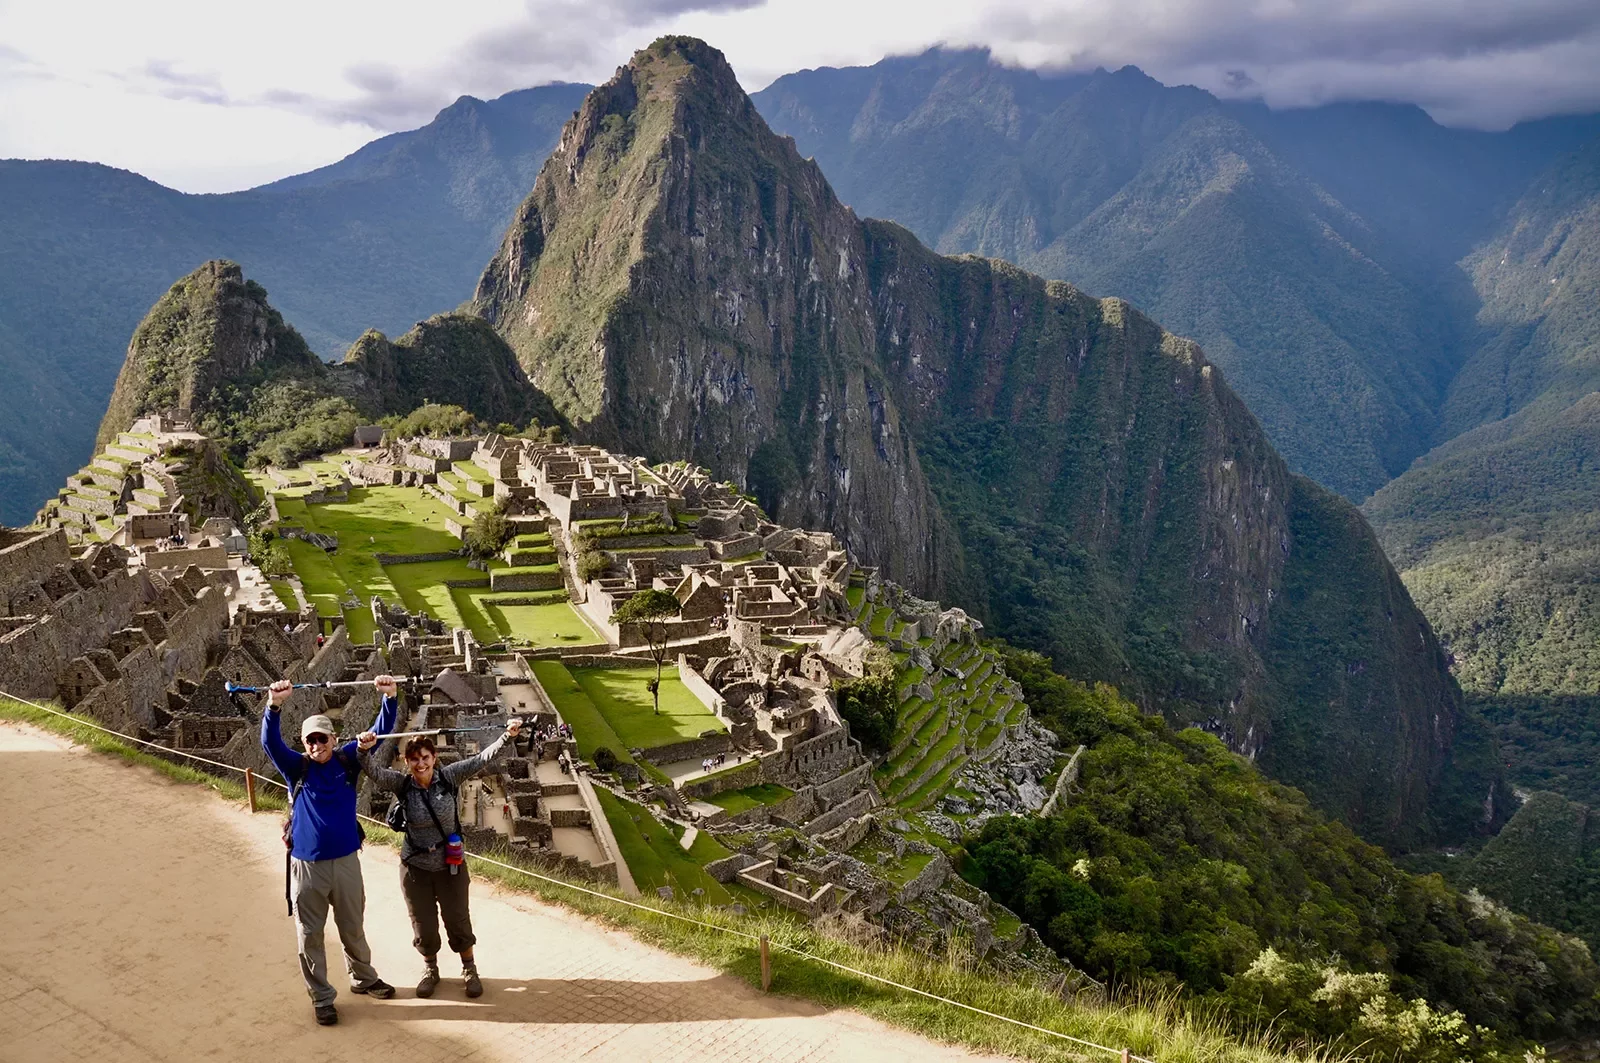 Two guests holding hiking poles over their heads in celebration, Machu Picchu in background.